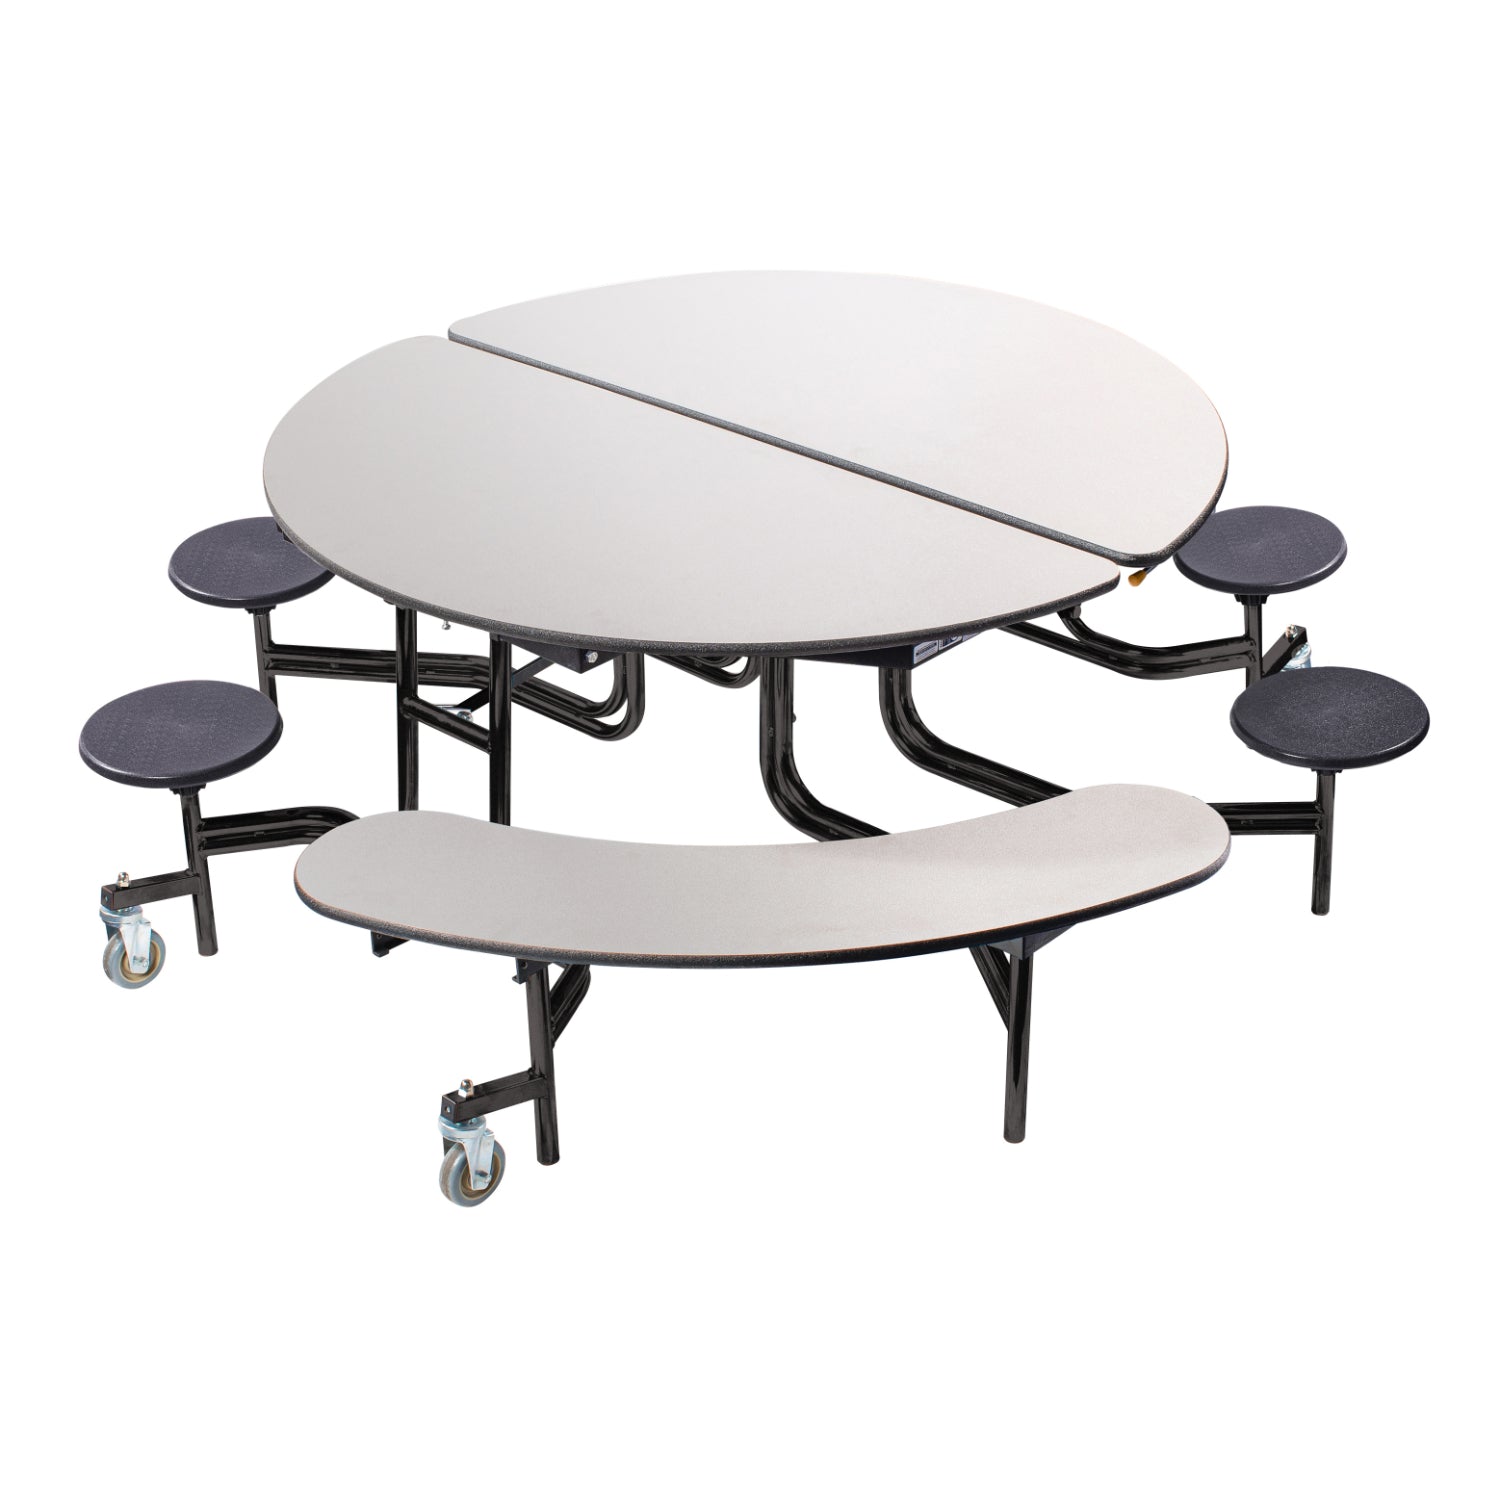 Mobile Combo Cafeteria Table, 60" Round with Stools and Benches, MDF Core, Black ProtectEdge, Textured Black Frame